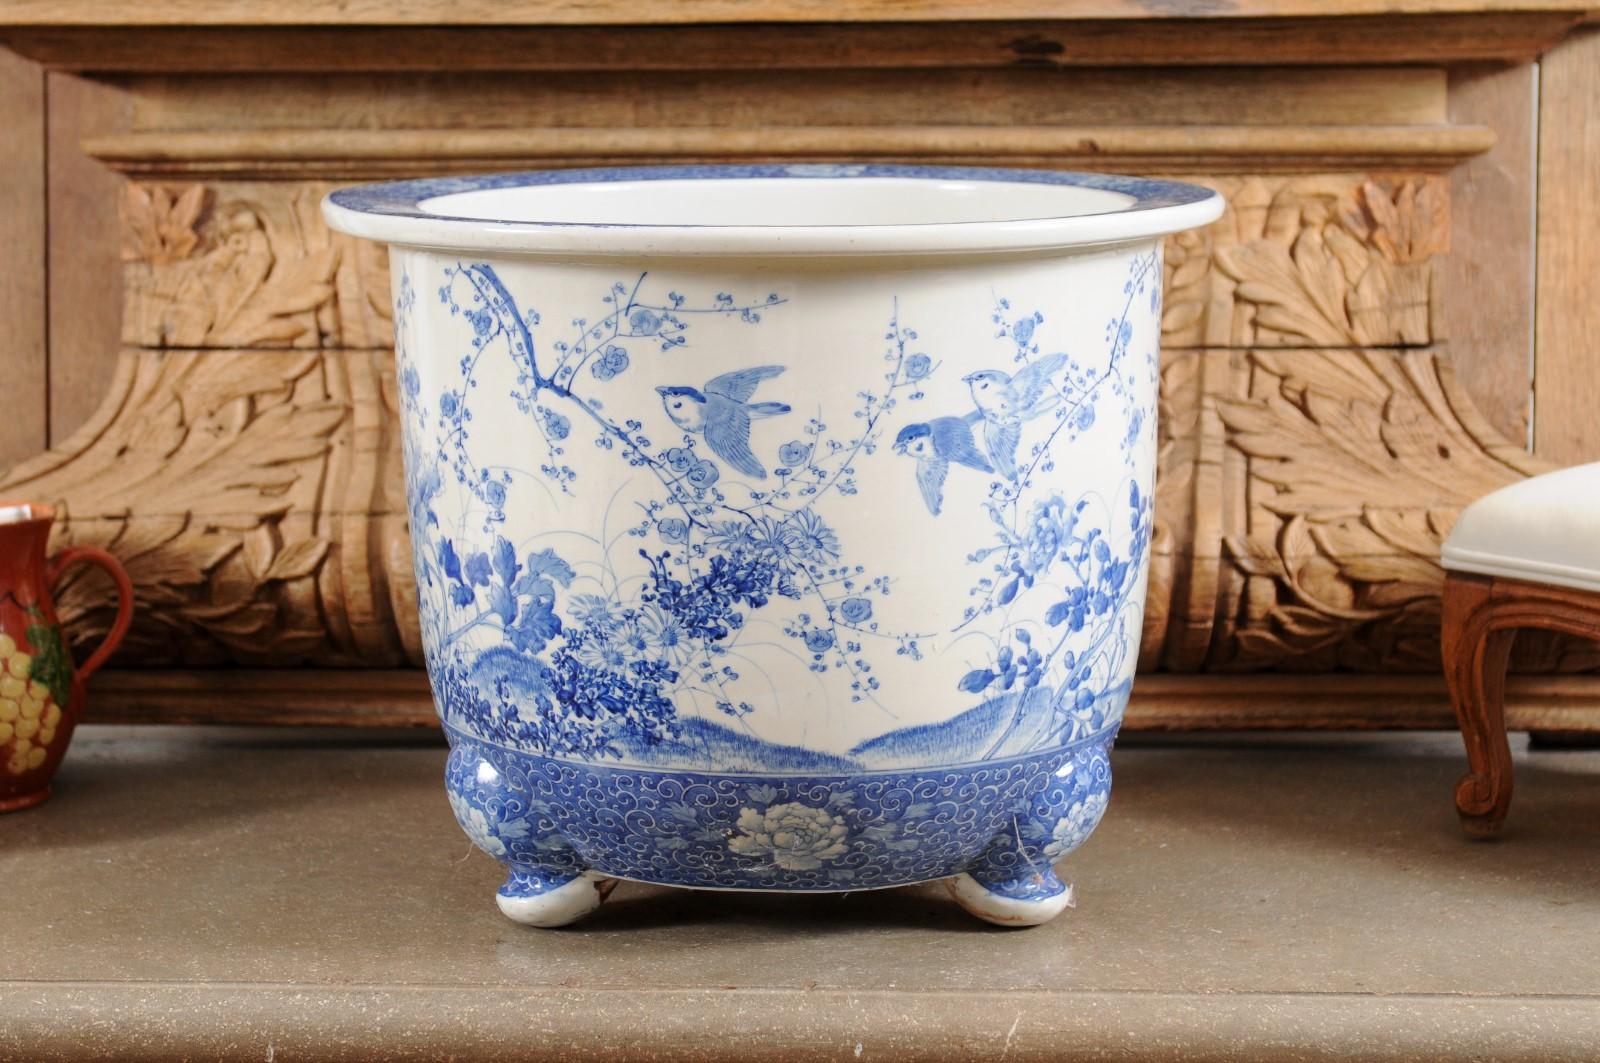 A Chinese blue and white planter from the late 19th century, with herons, birds and flowers. Created in China during the later years of the 19th century, this planter features a circular body beautifully adorned with a blue and white decor depicting